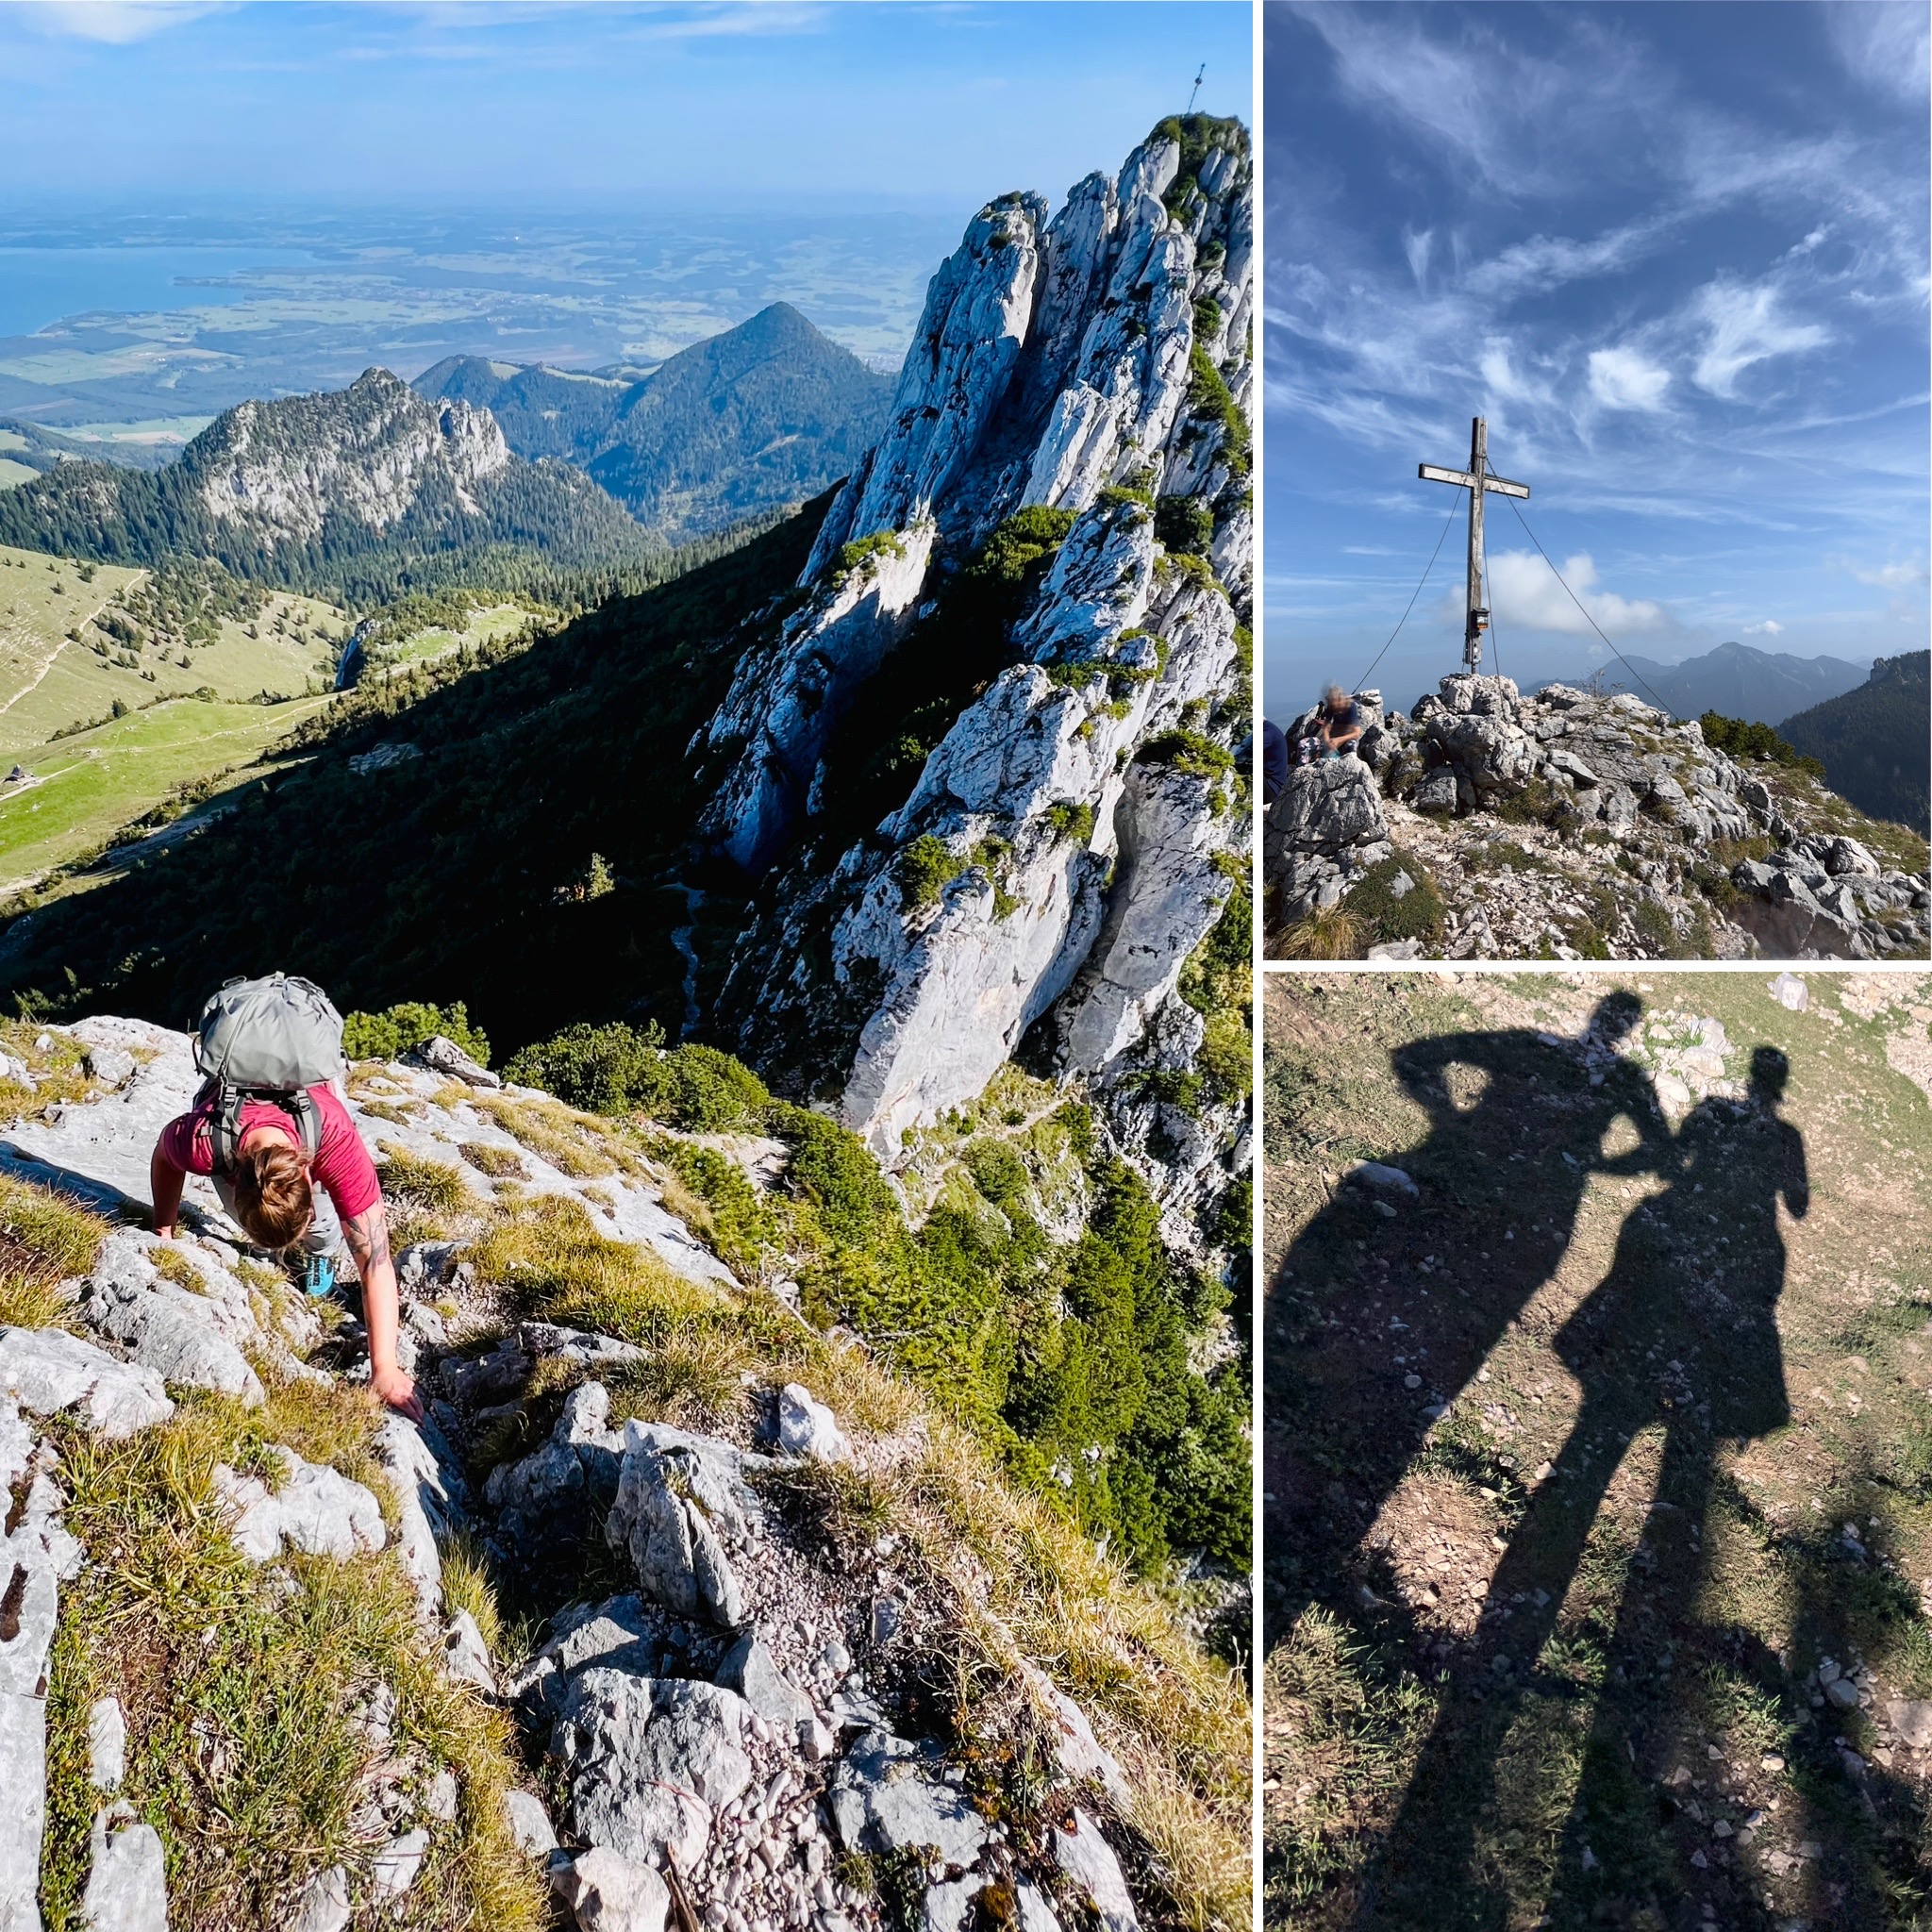 Collage of three pictures. 1: Feli’s sister scrambling down from the top of the Kampenwand summit with a stunning view over Chiemgau Alps and Chiemsee. 2: The summit cross of Gedererwand close to Kampenwand. 3: Feli and her sister’s shadow as silhouettes on green grass while hiking.